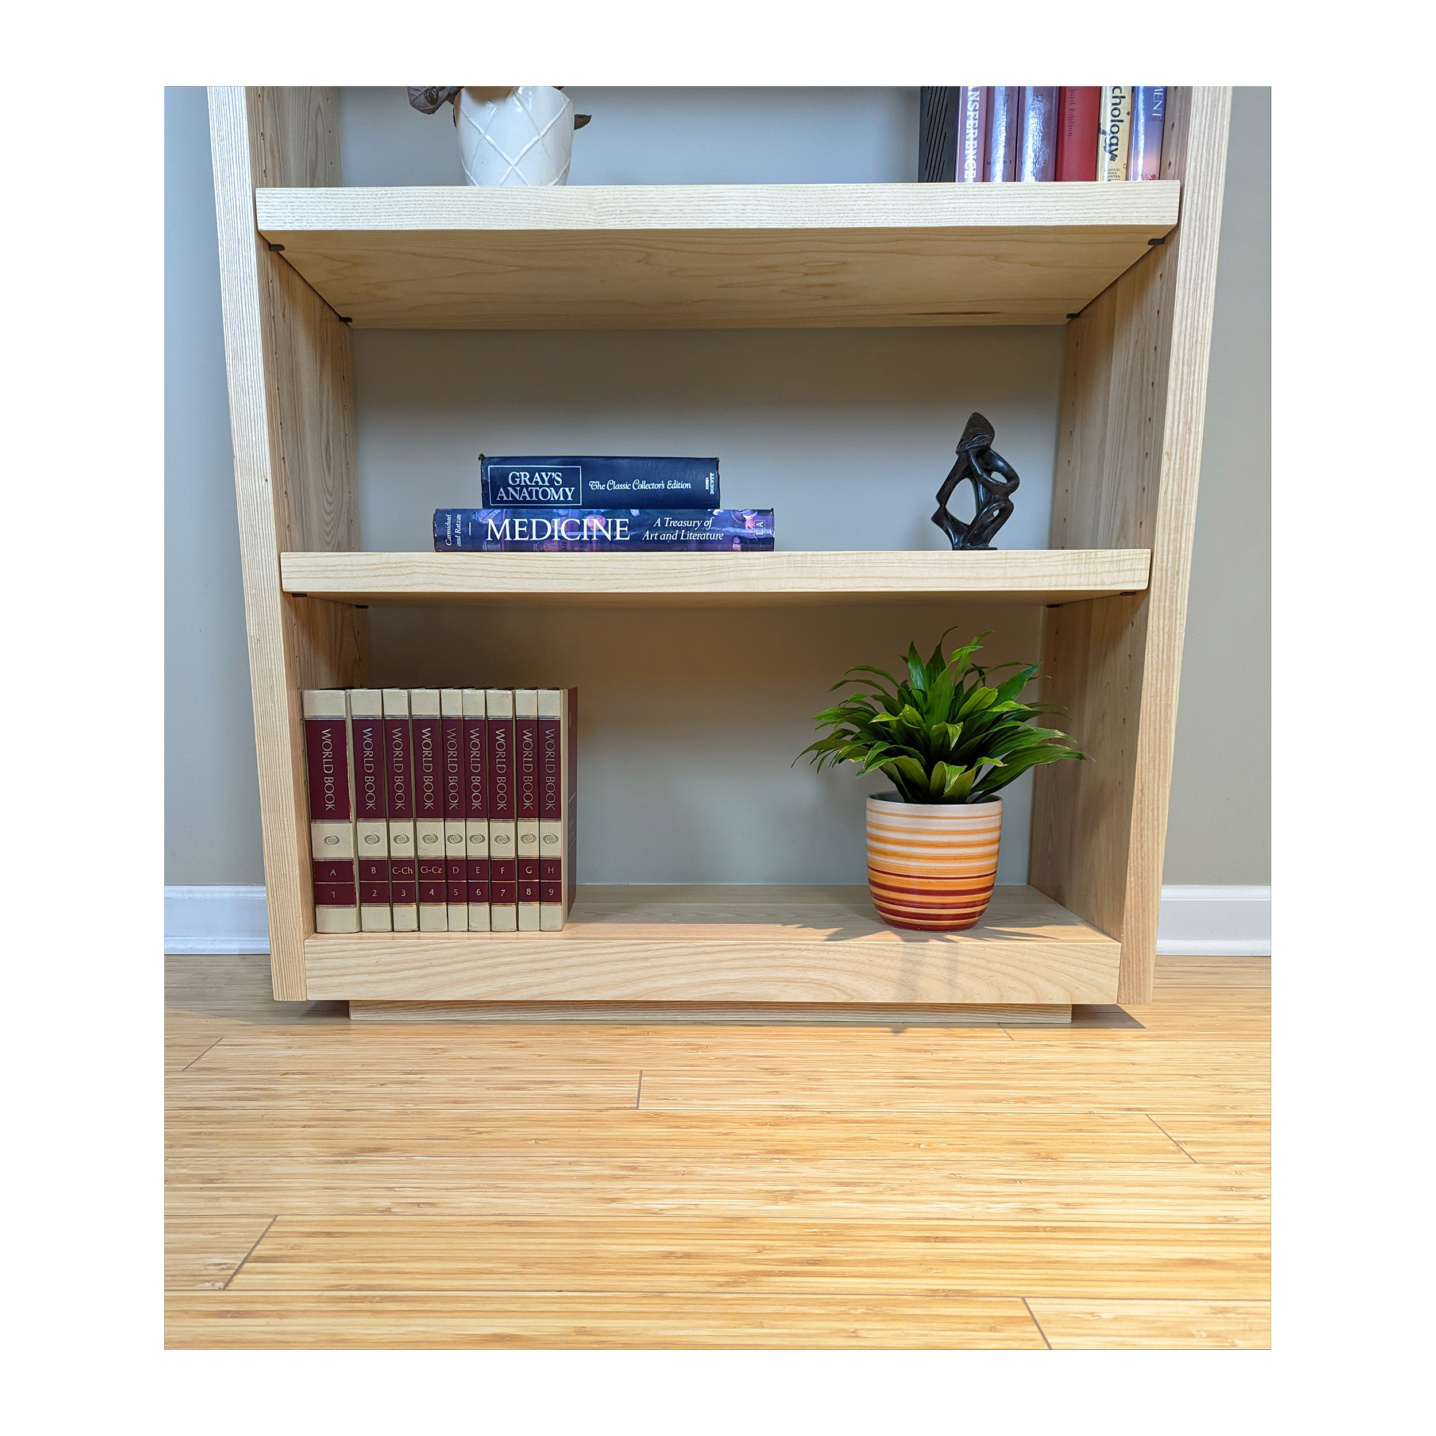 Custom Ash bookcase built in Ohio--Made by 57NorthPlank Tailored Modern Furniture